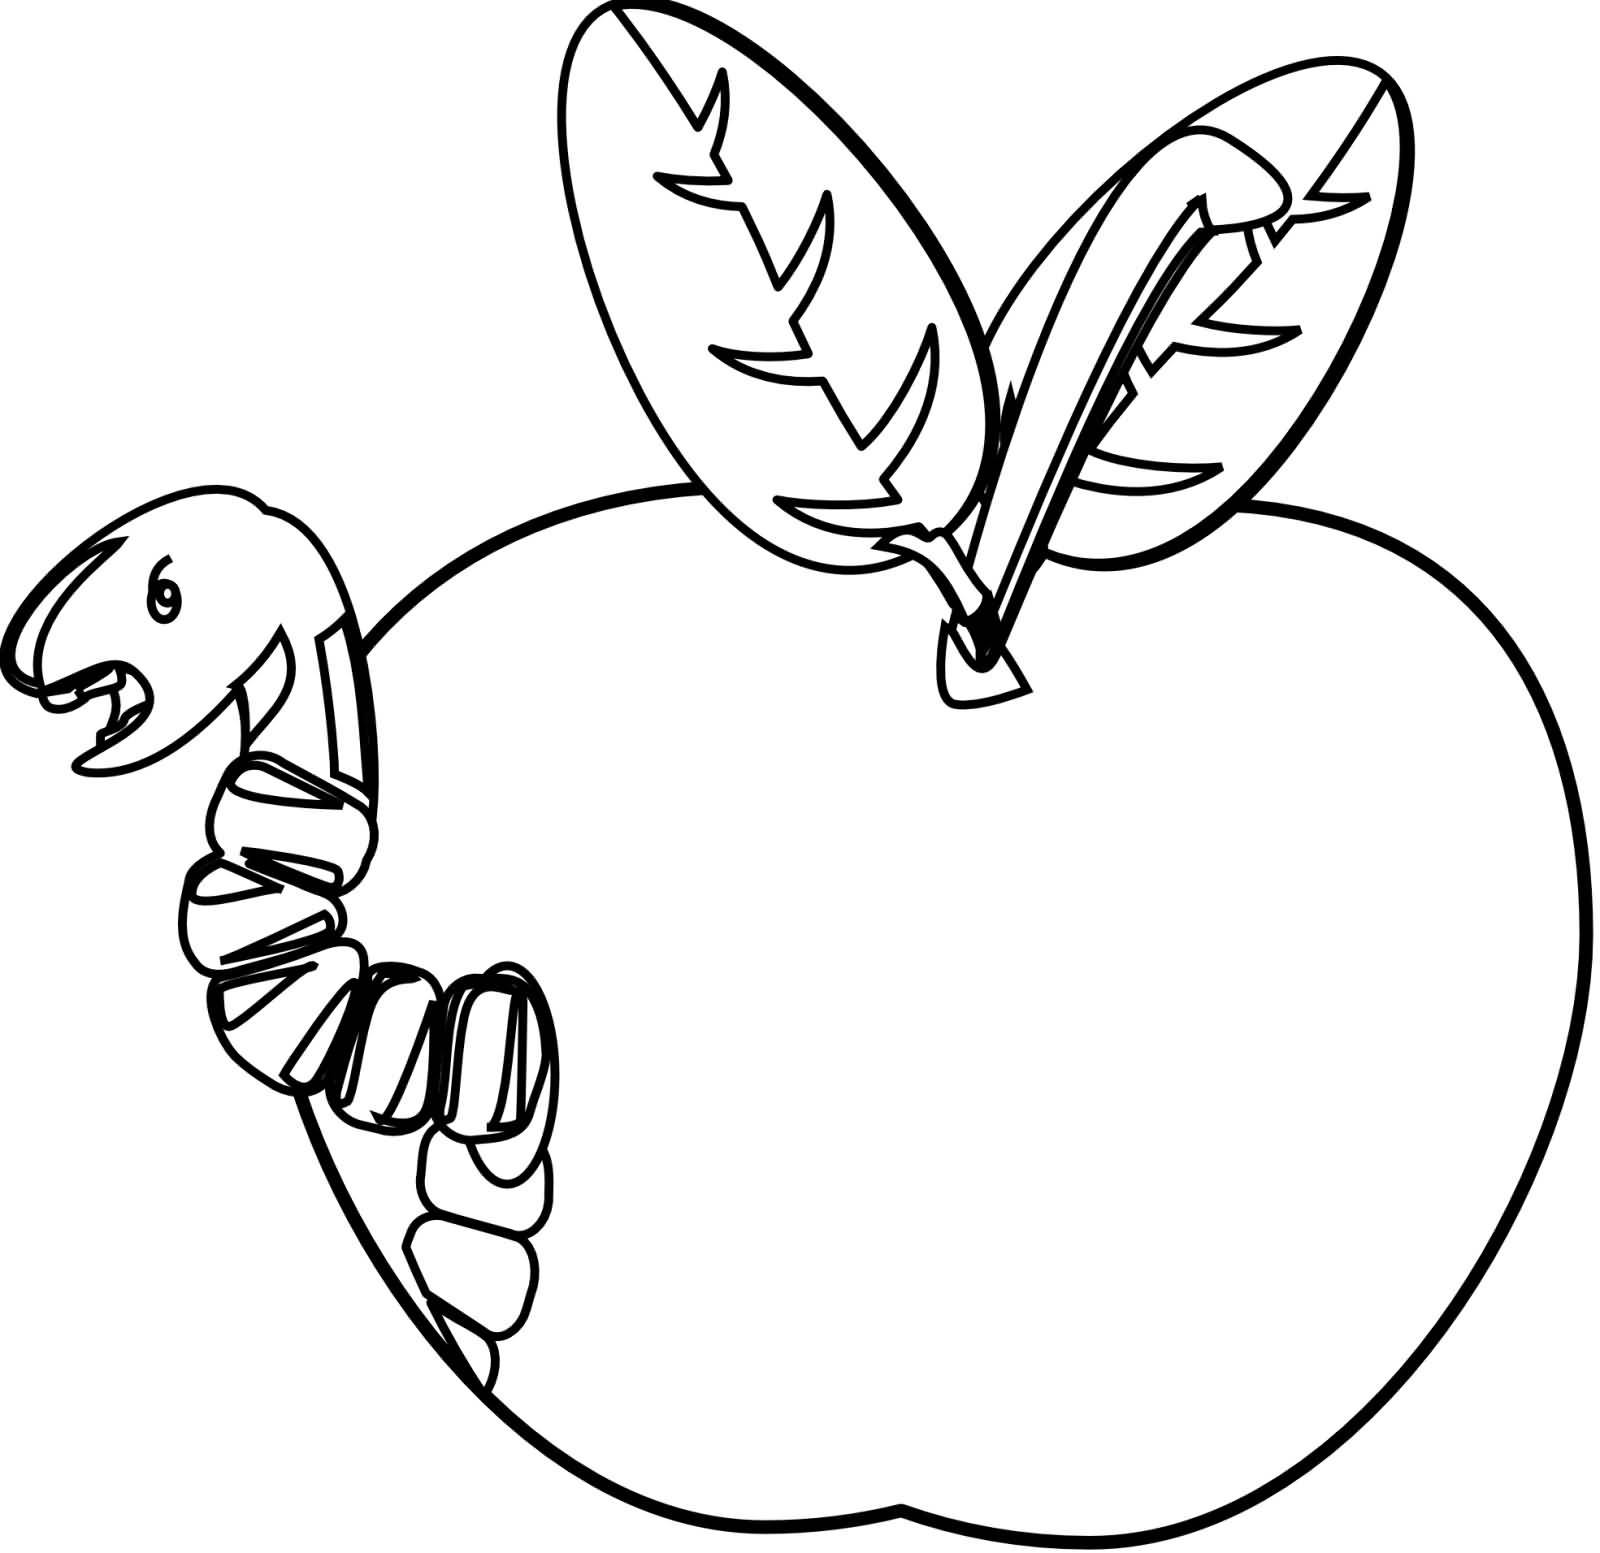 Simple Black And White Worm In Rotten Apple Tattoo Design